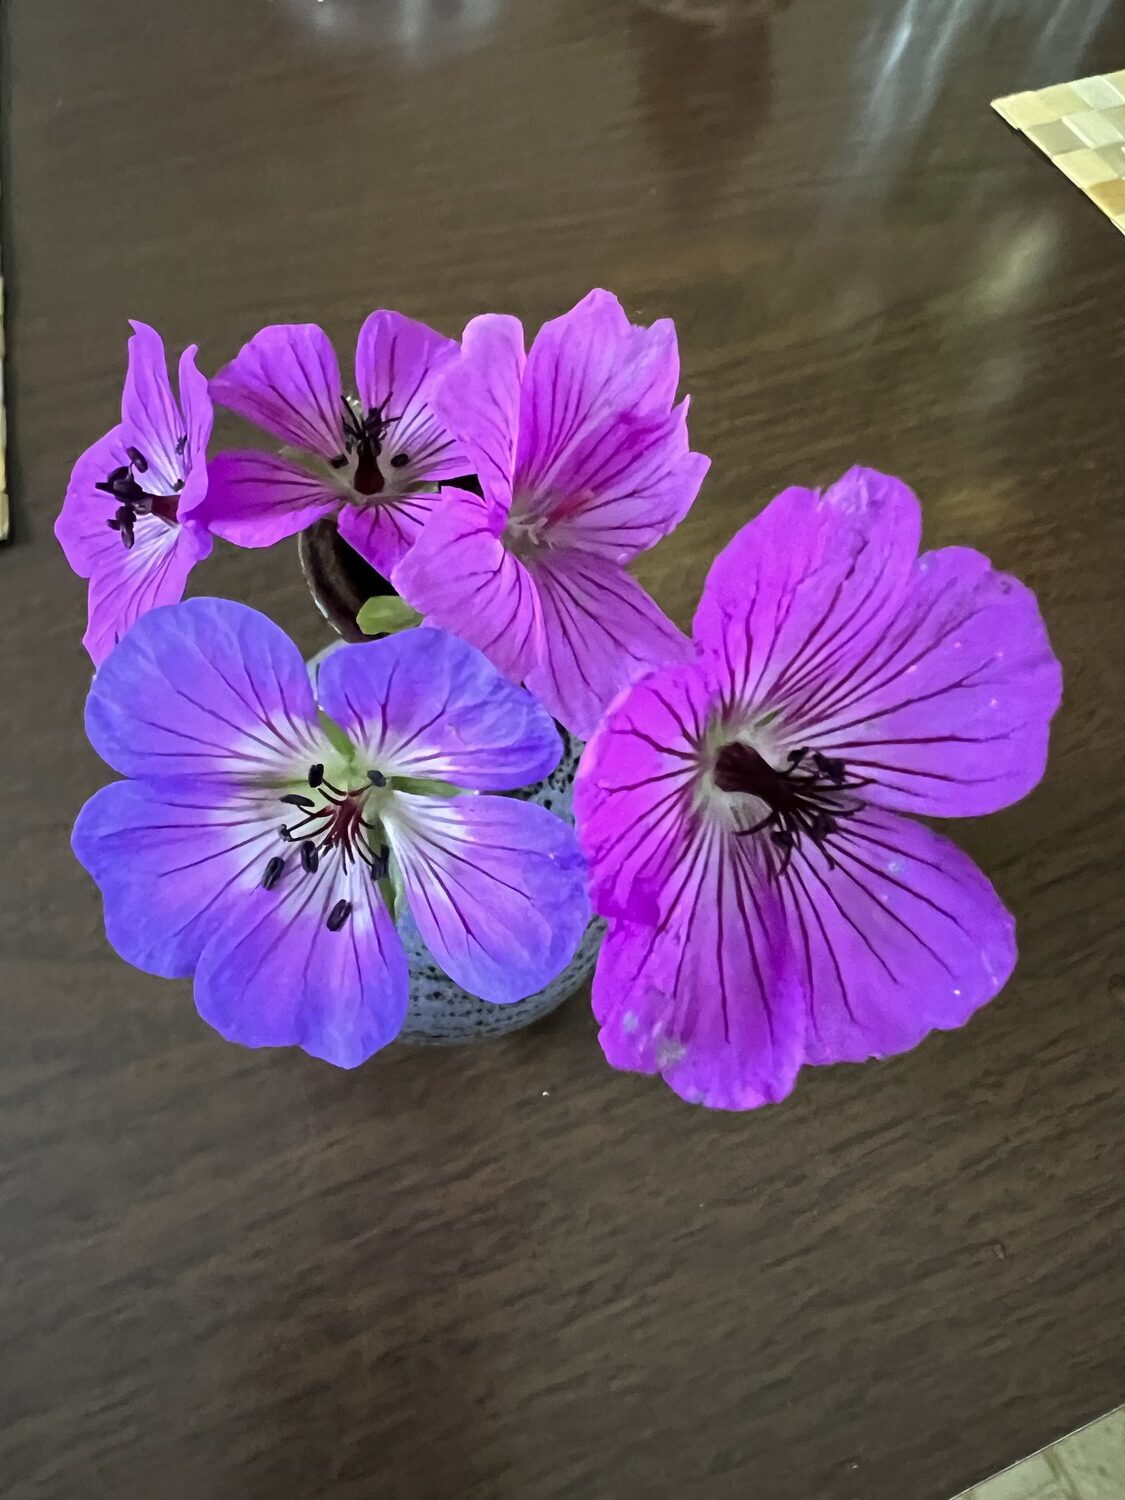 A collection of four perennial geranium flowers in a 3-inch-tall vase.  The flowers only last a day but are plentiful in the fall and easily replaced.  ANDREW MESSINGER